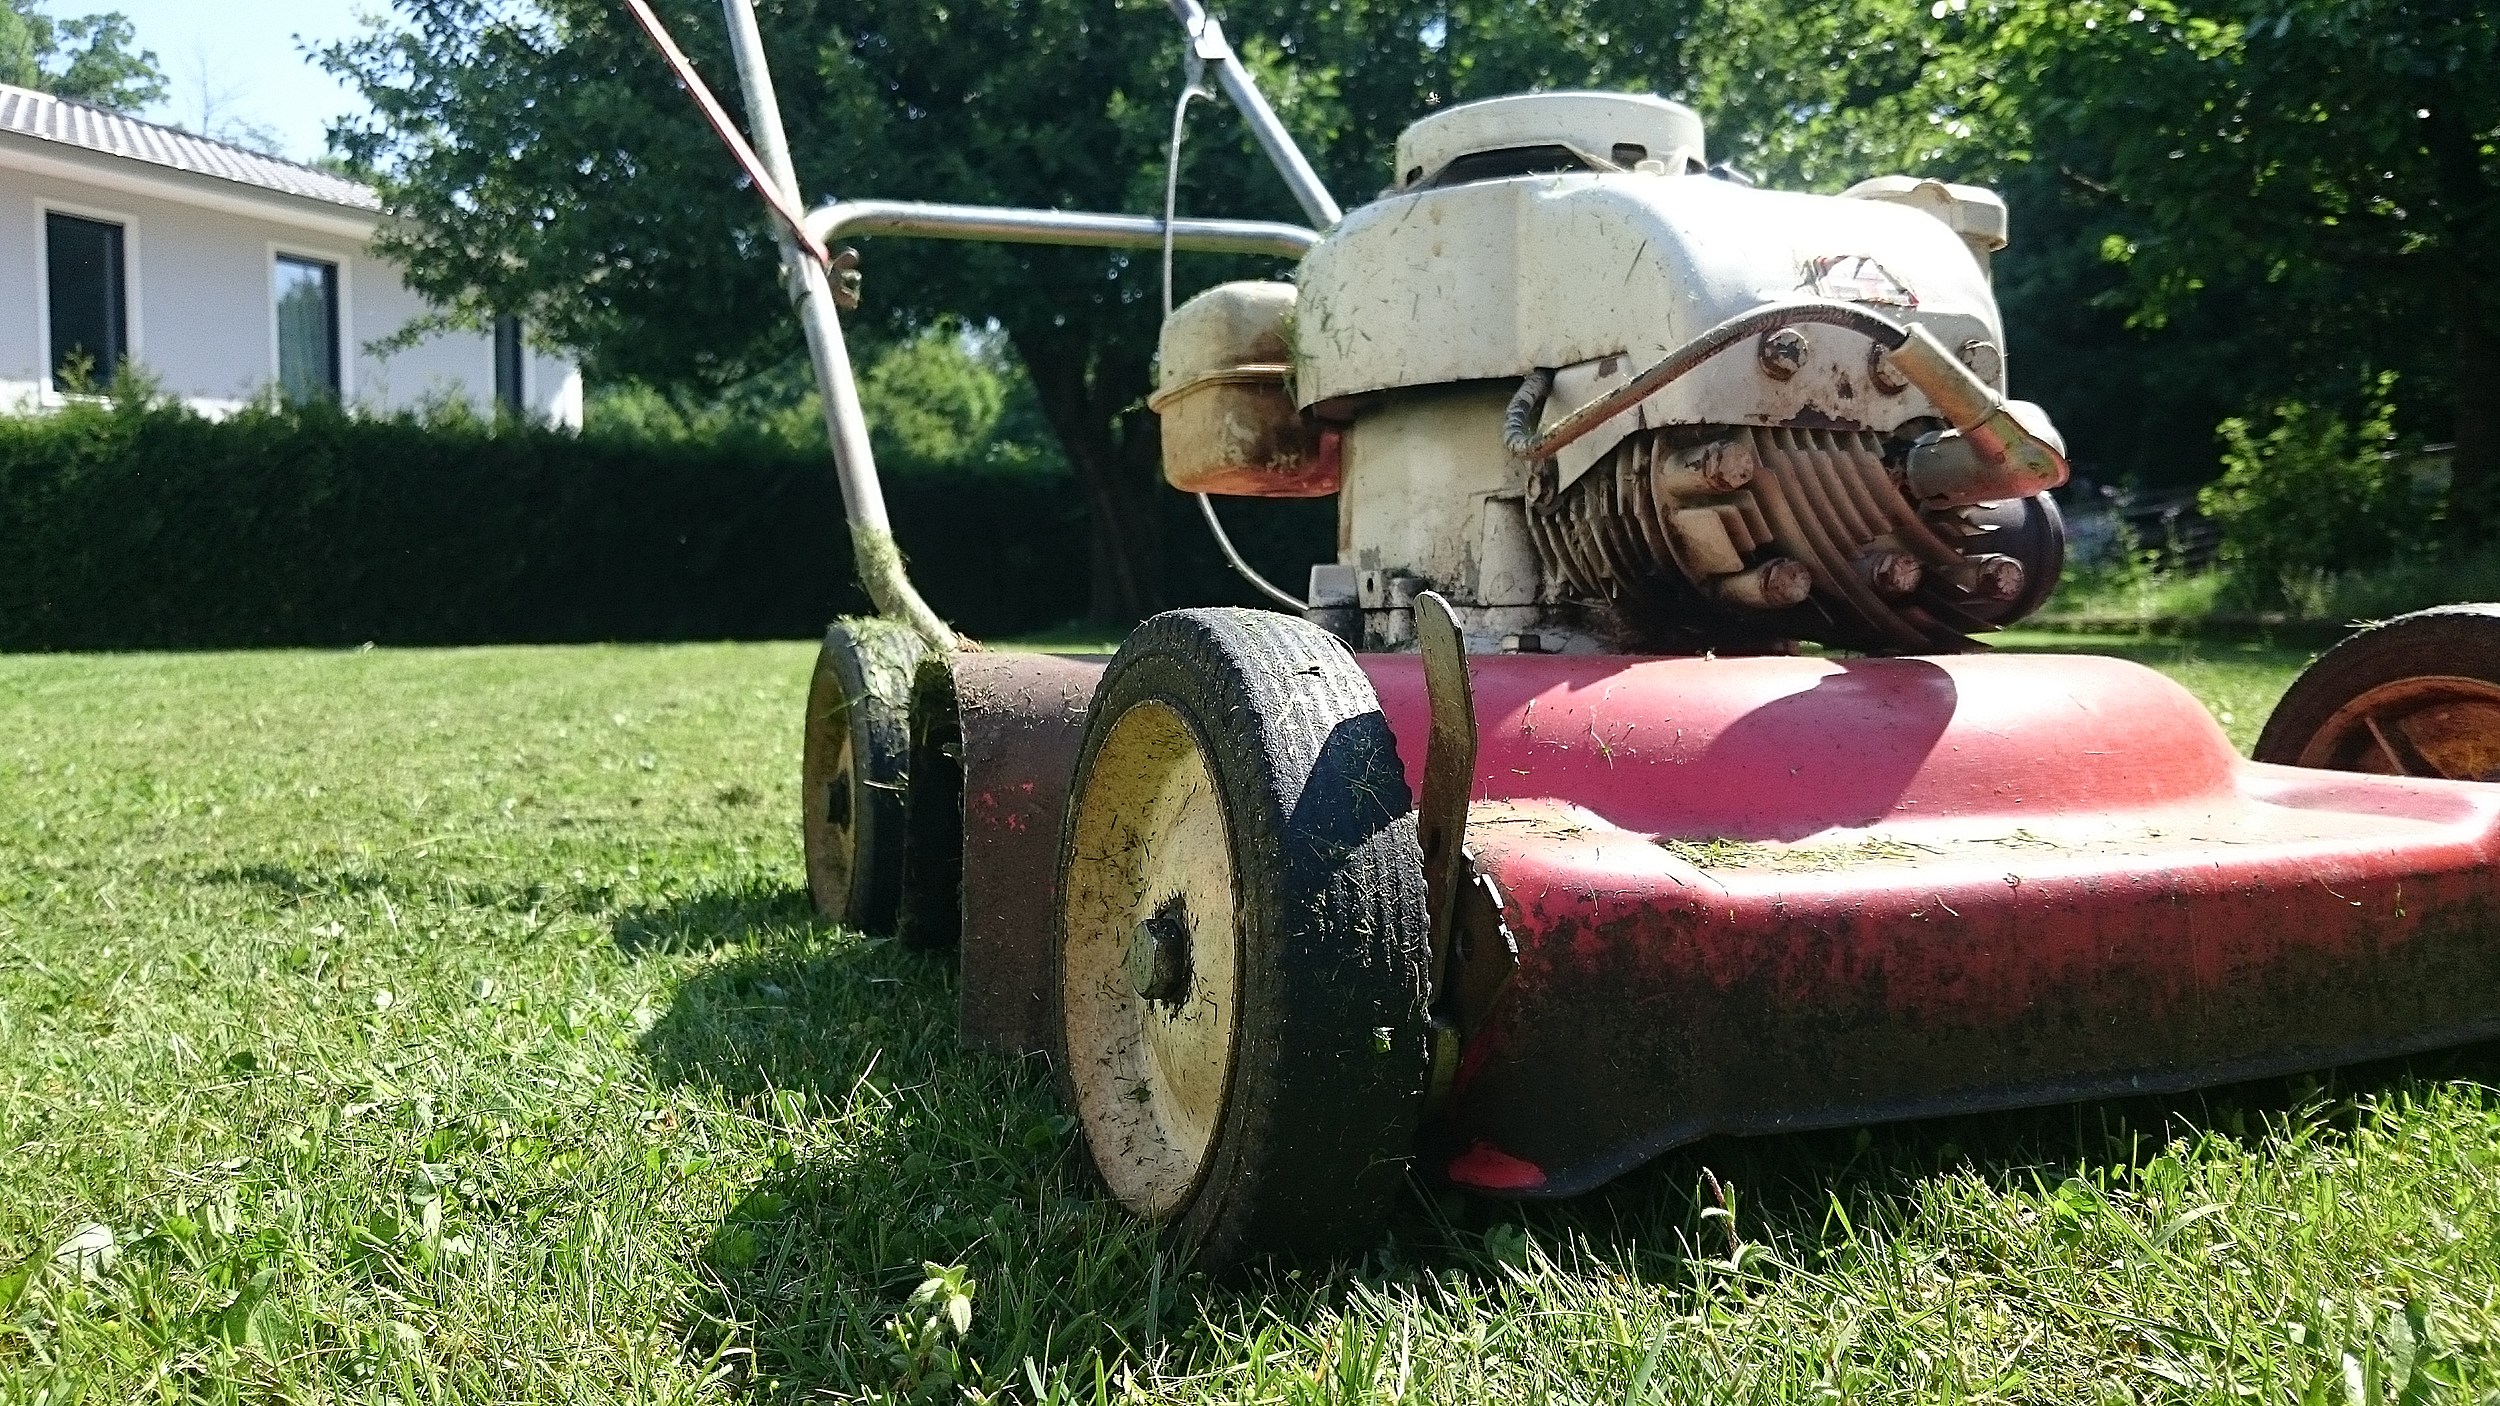 Lawn Mowing Laws Could Get You A Fine